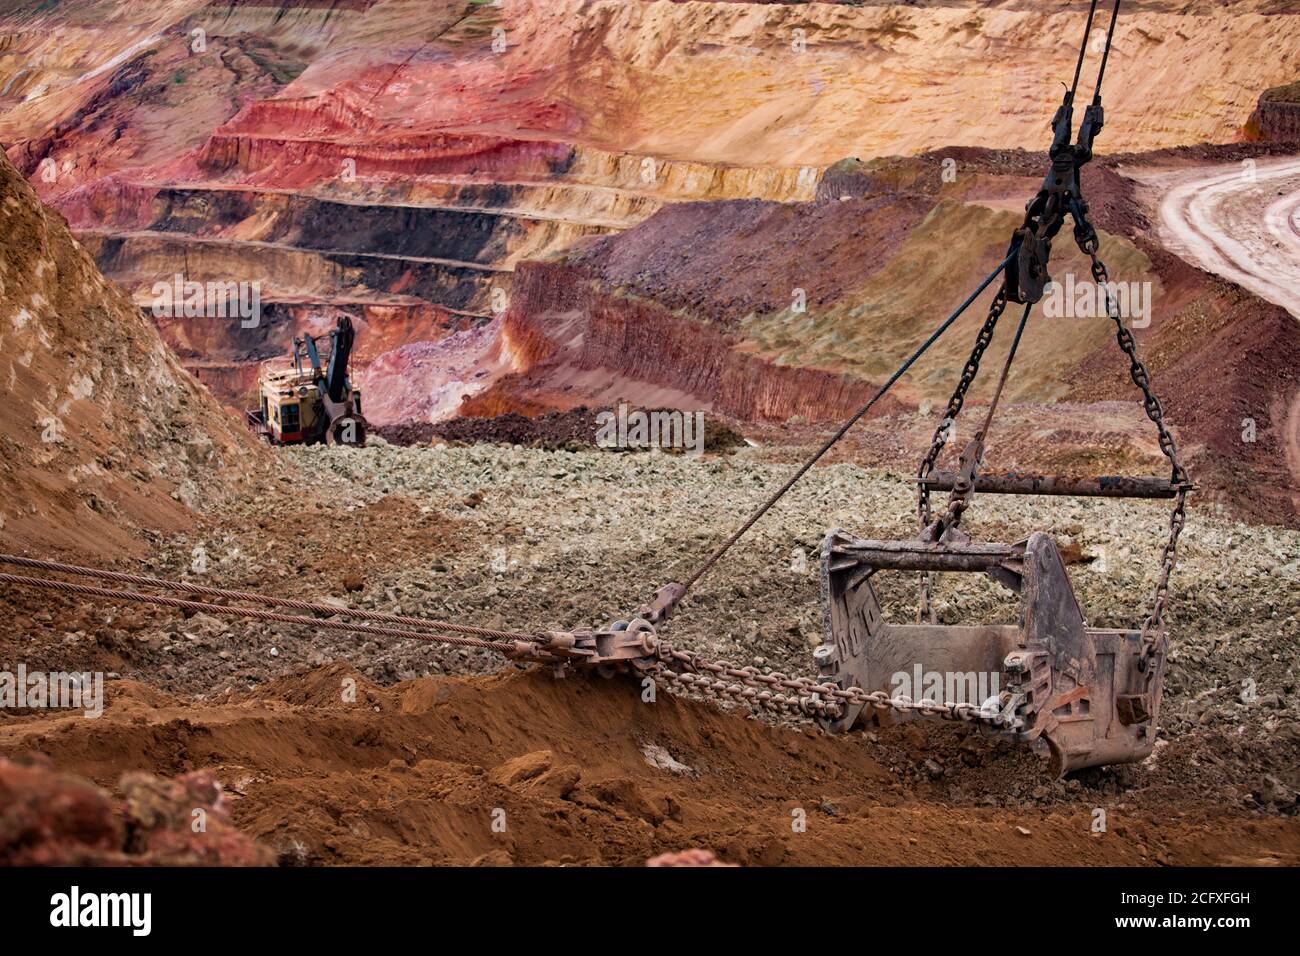 Aluminium ore quarry. Bauxite clay open-cut mining. Grounworks. Walking dragline bucket with empty ground. The multi-color quarry steps and excavator Stock Photo